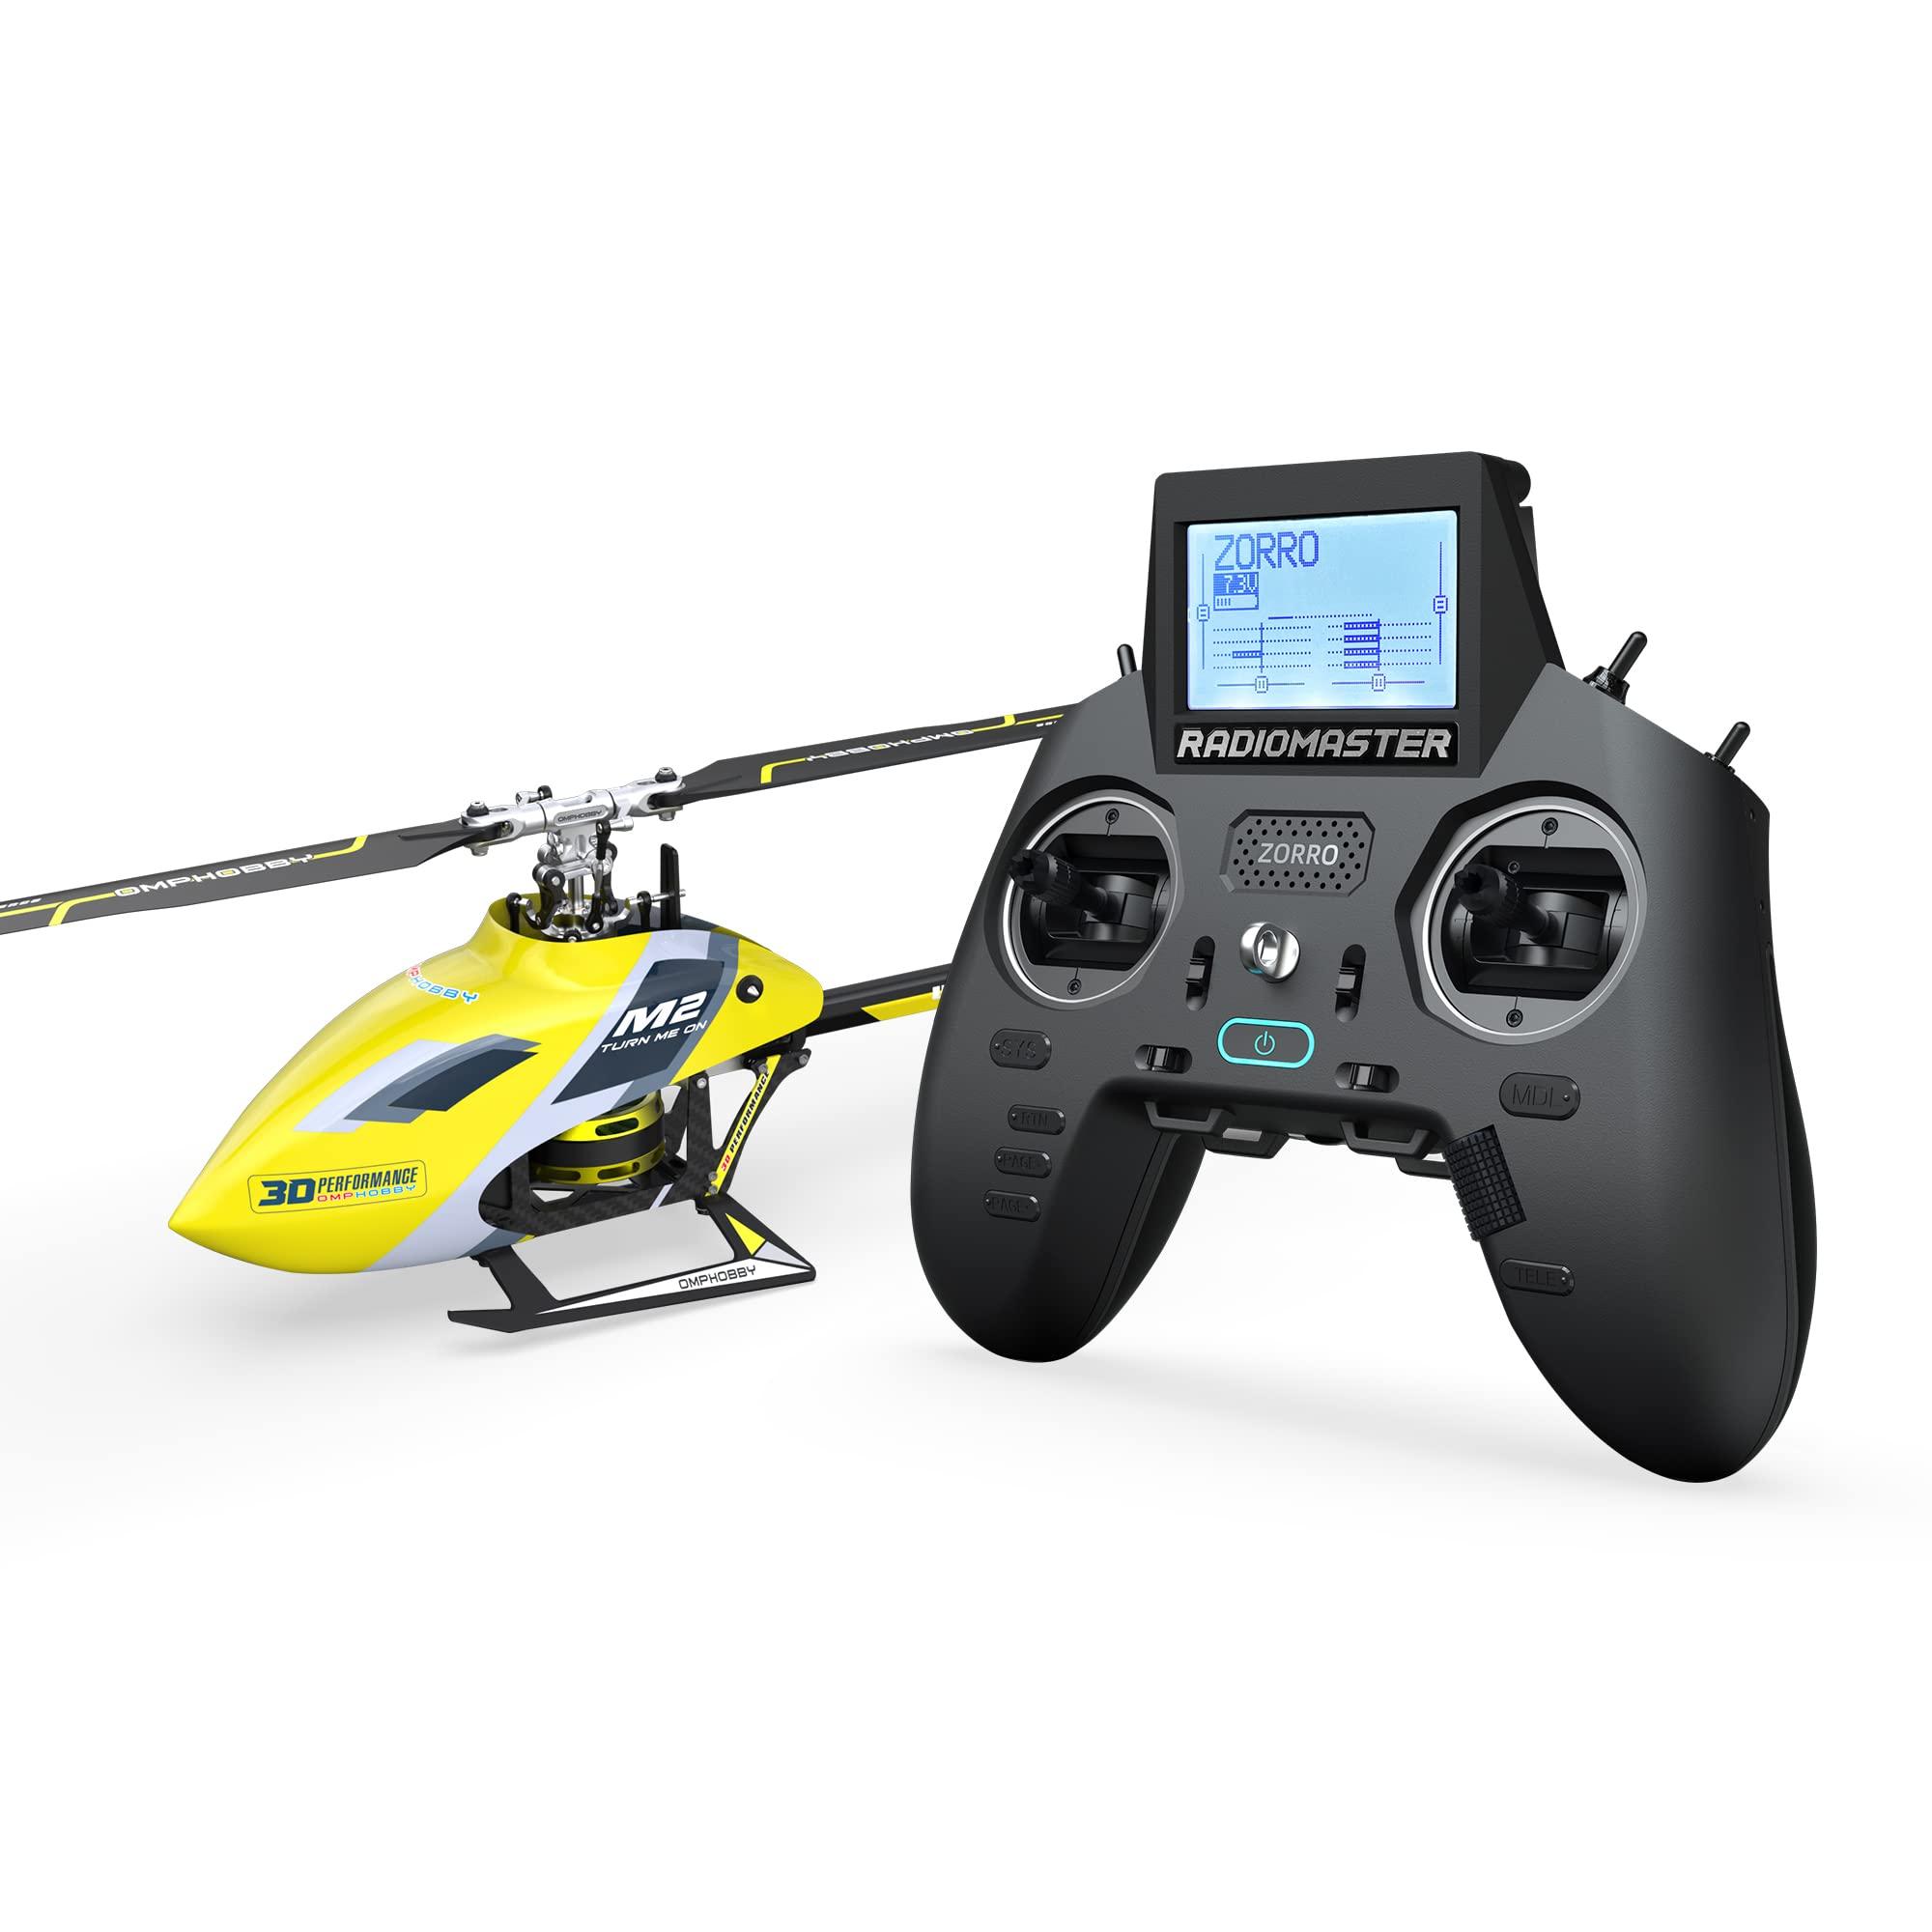 Omphobby M2 Flybarless Rc Helicopter:  Enhance Your Flying Experience with the Omphobby M2 RC Helicopter